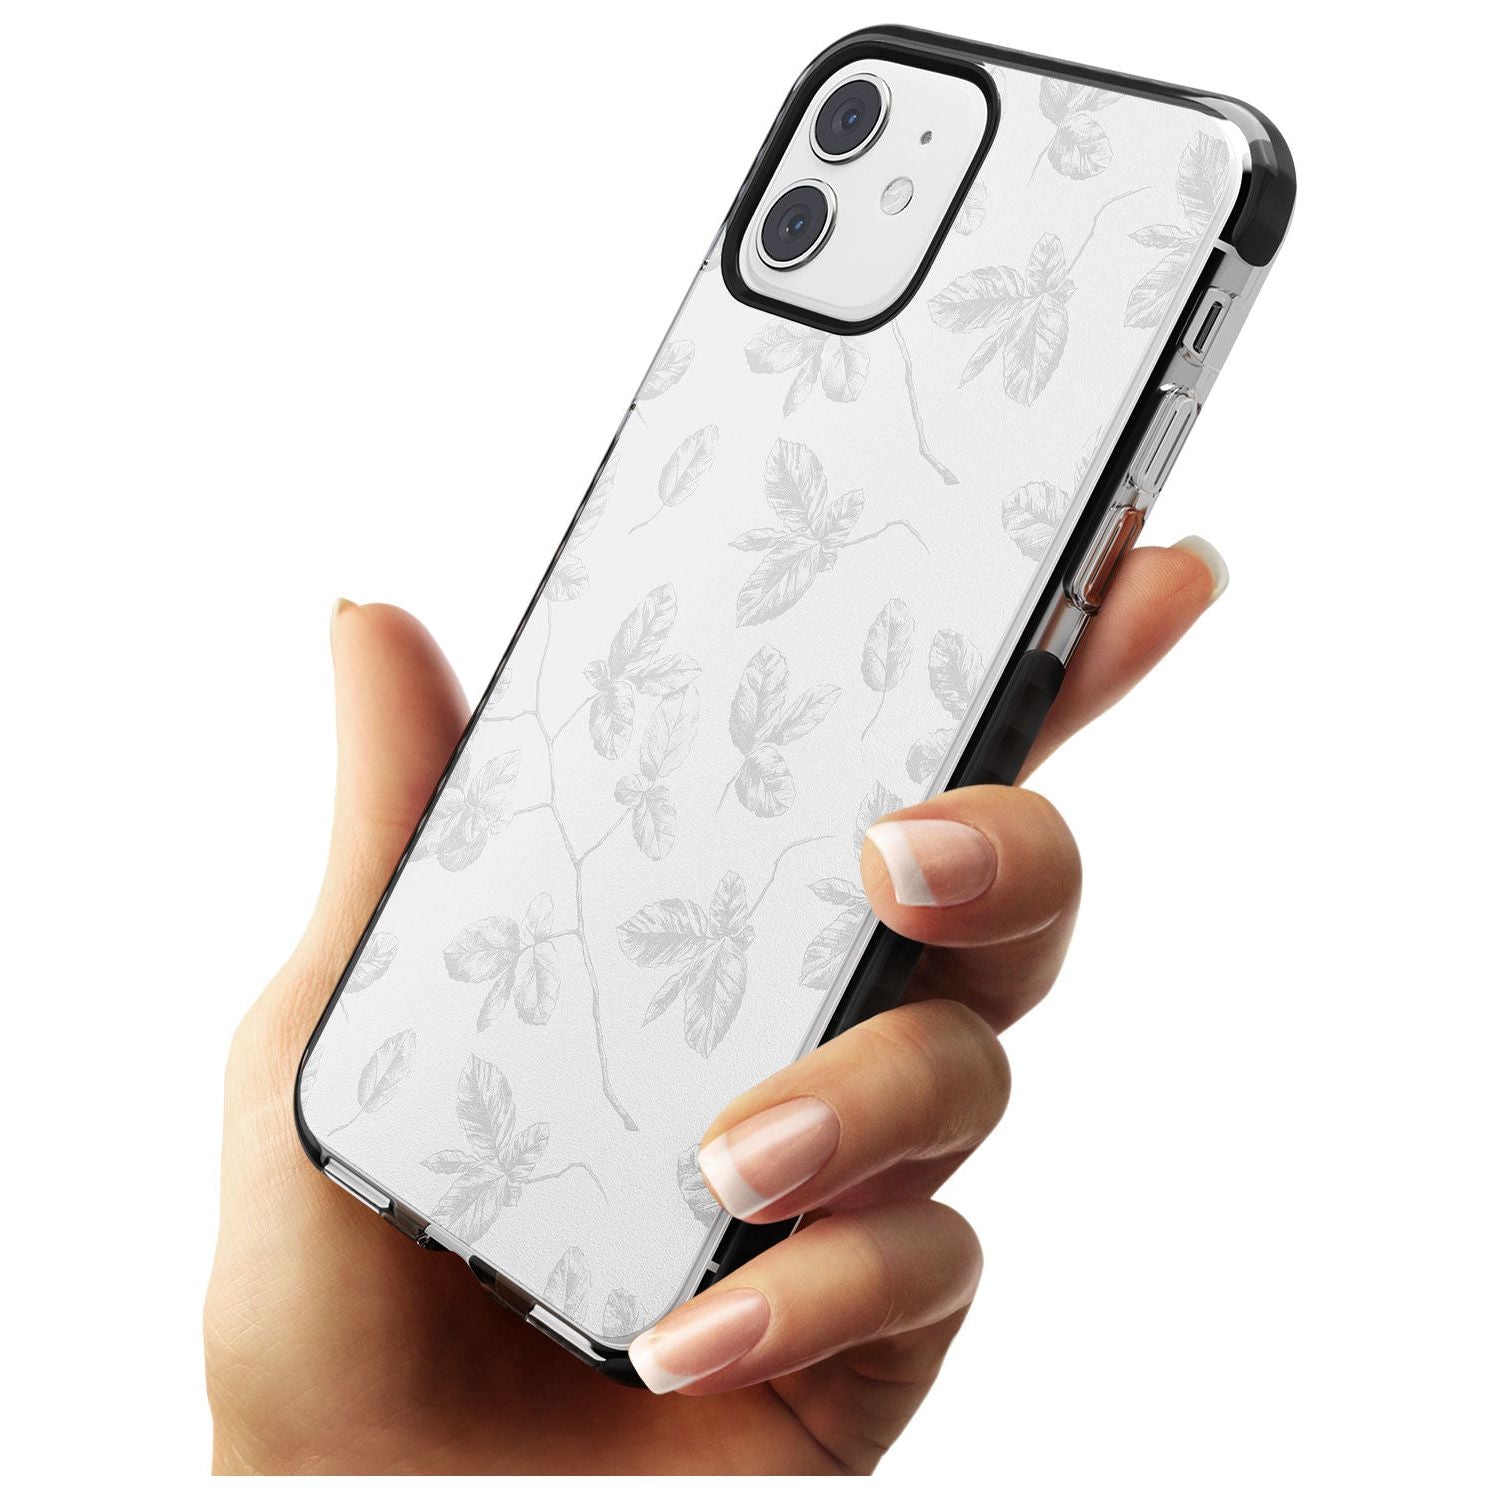 Grey Branches Vintage Botanical Black Impact Phone Case for iPhone 11